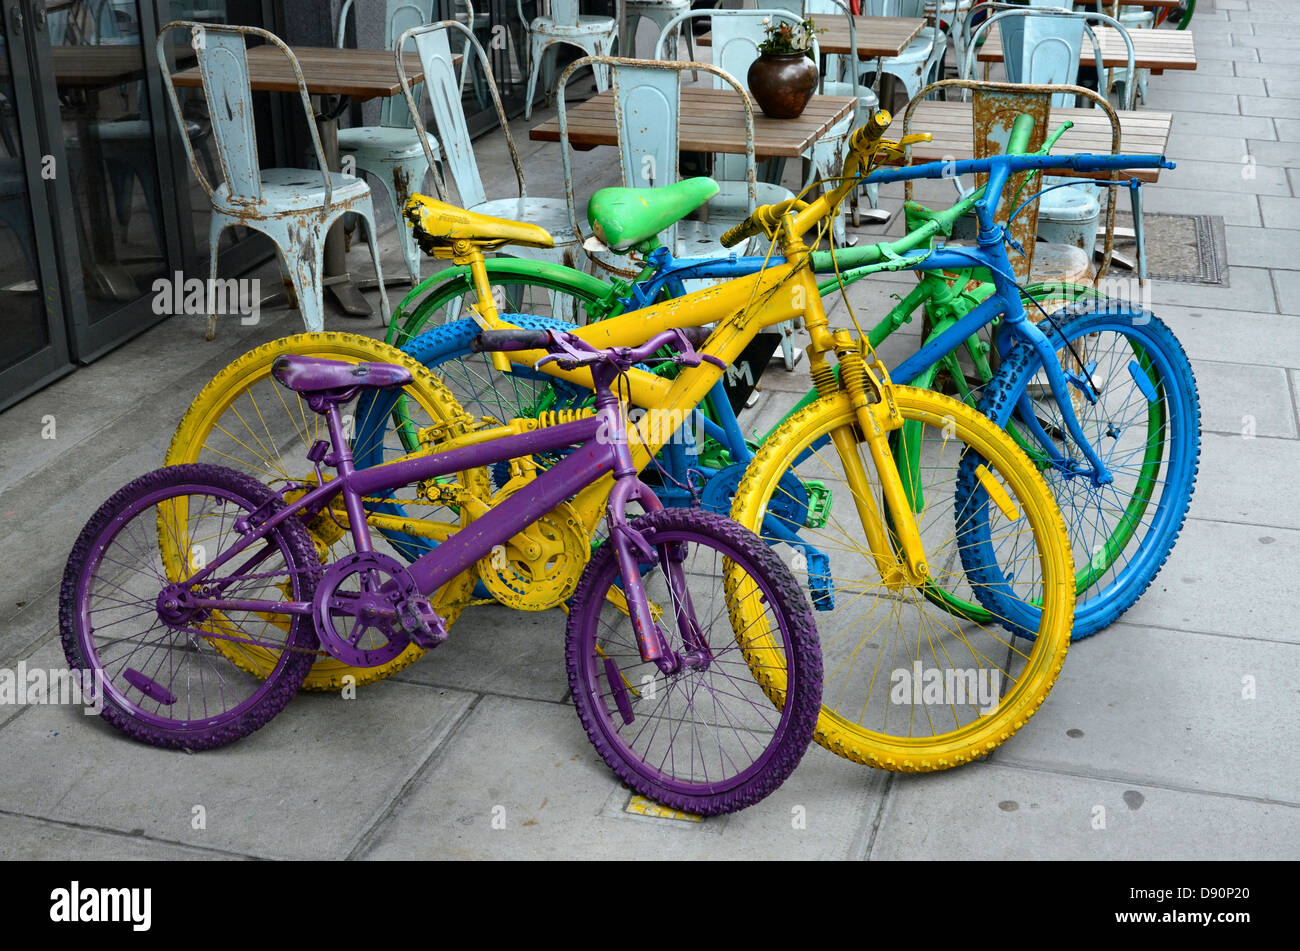 Colourful bicycles help to advertise Dishoom, a restaurant in Upper St Martin’s Lane in the Covent Garden area of London. Stock Photo